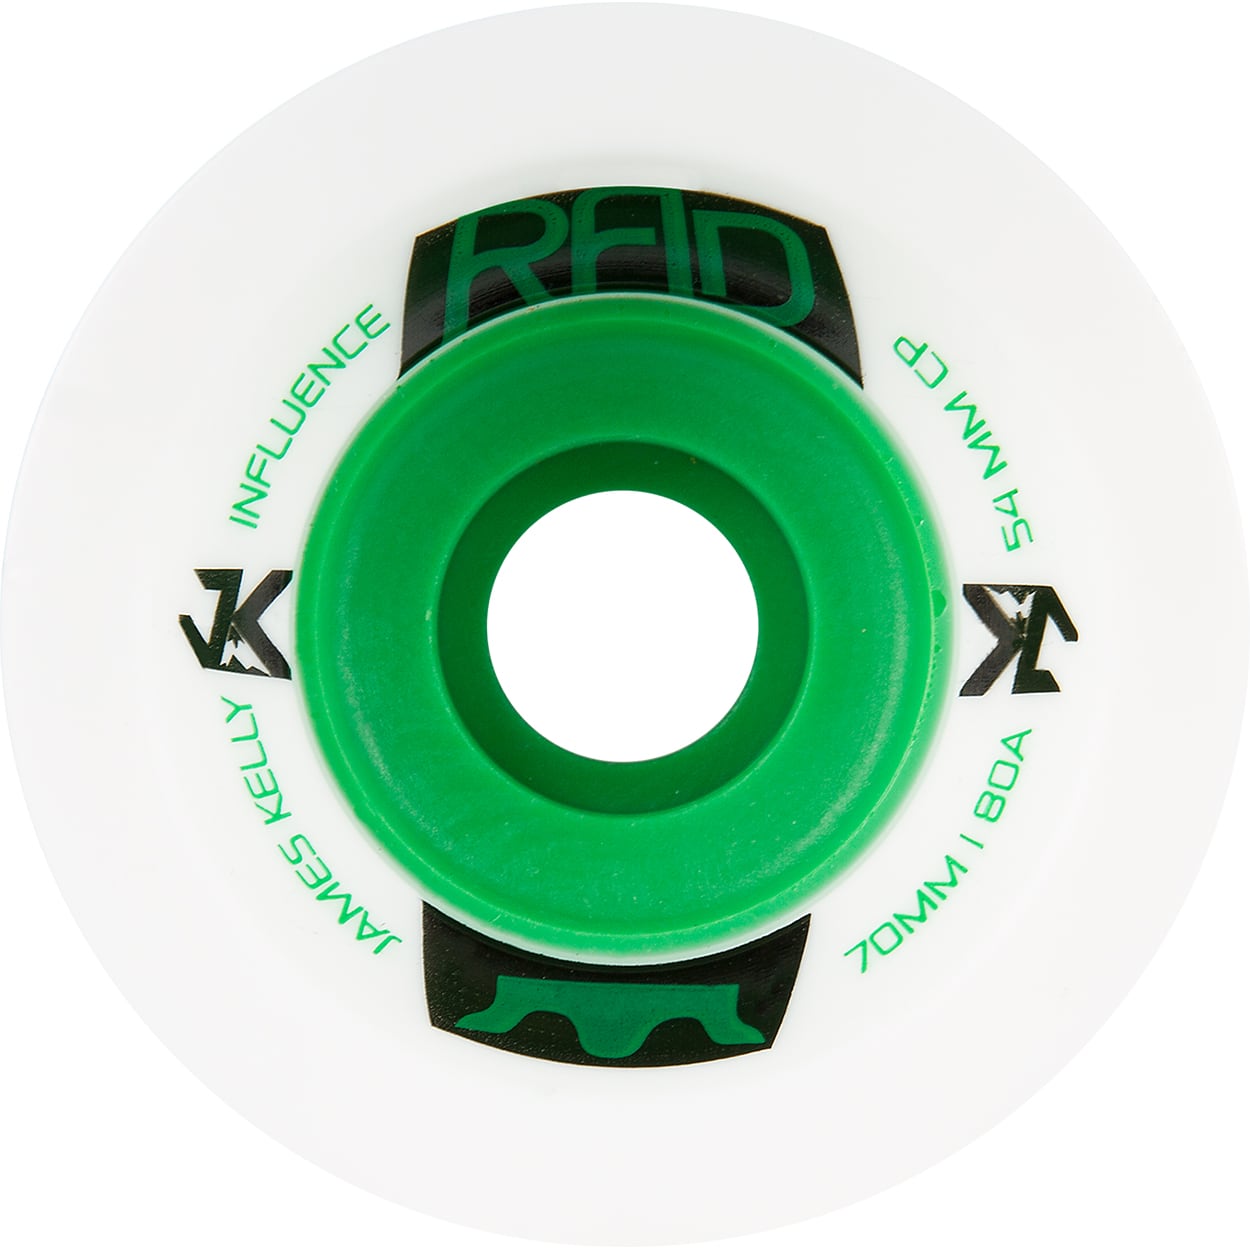 SECTOR 9 WHEELS | JAMES KELLY INFLUENCE (70mm 80A)